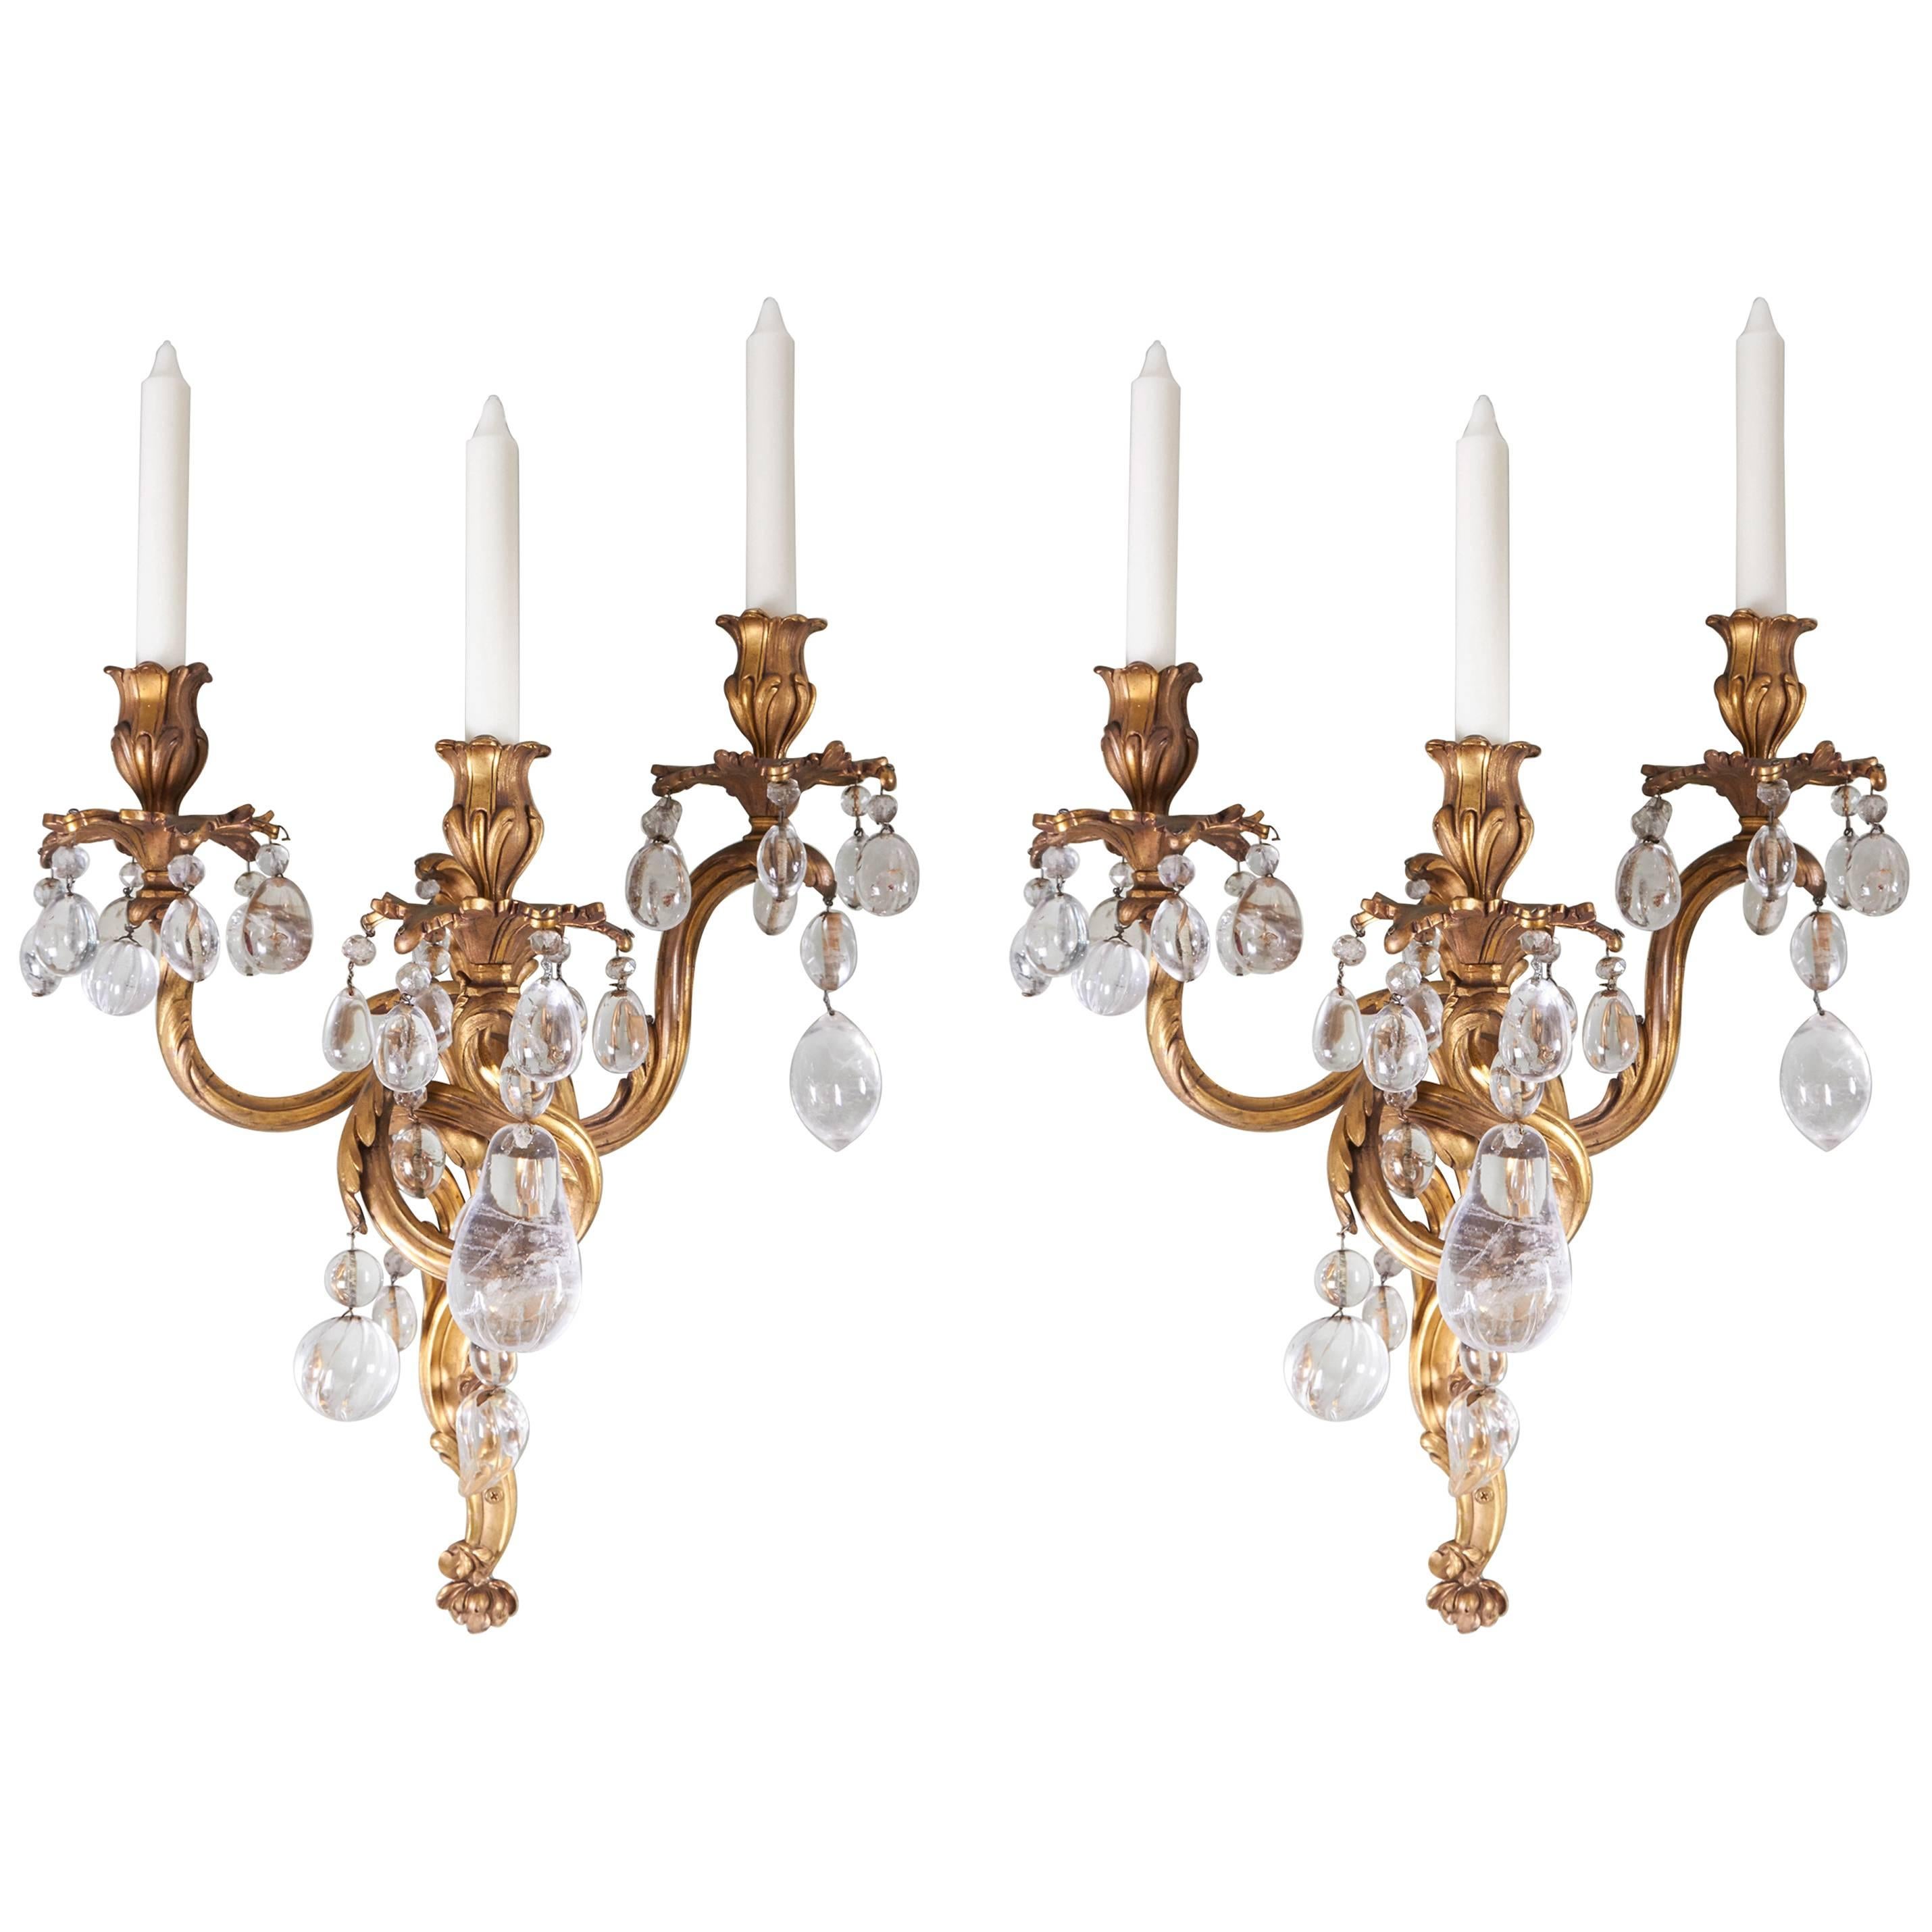 A Pair of Louis XV Style Bronze Dore and Rock Crystal Sconces 